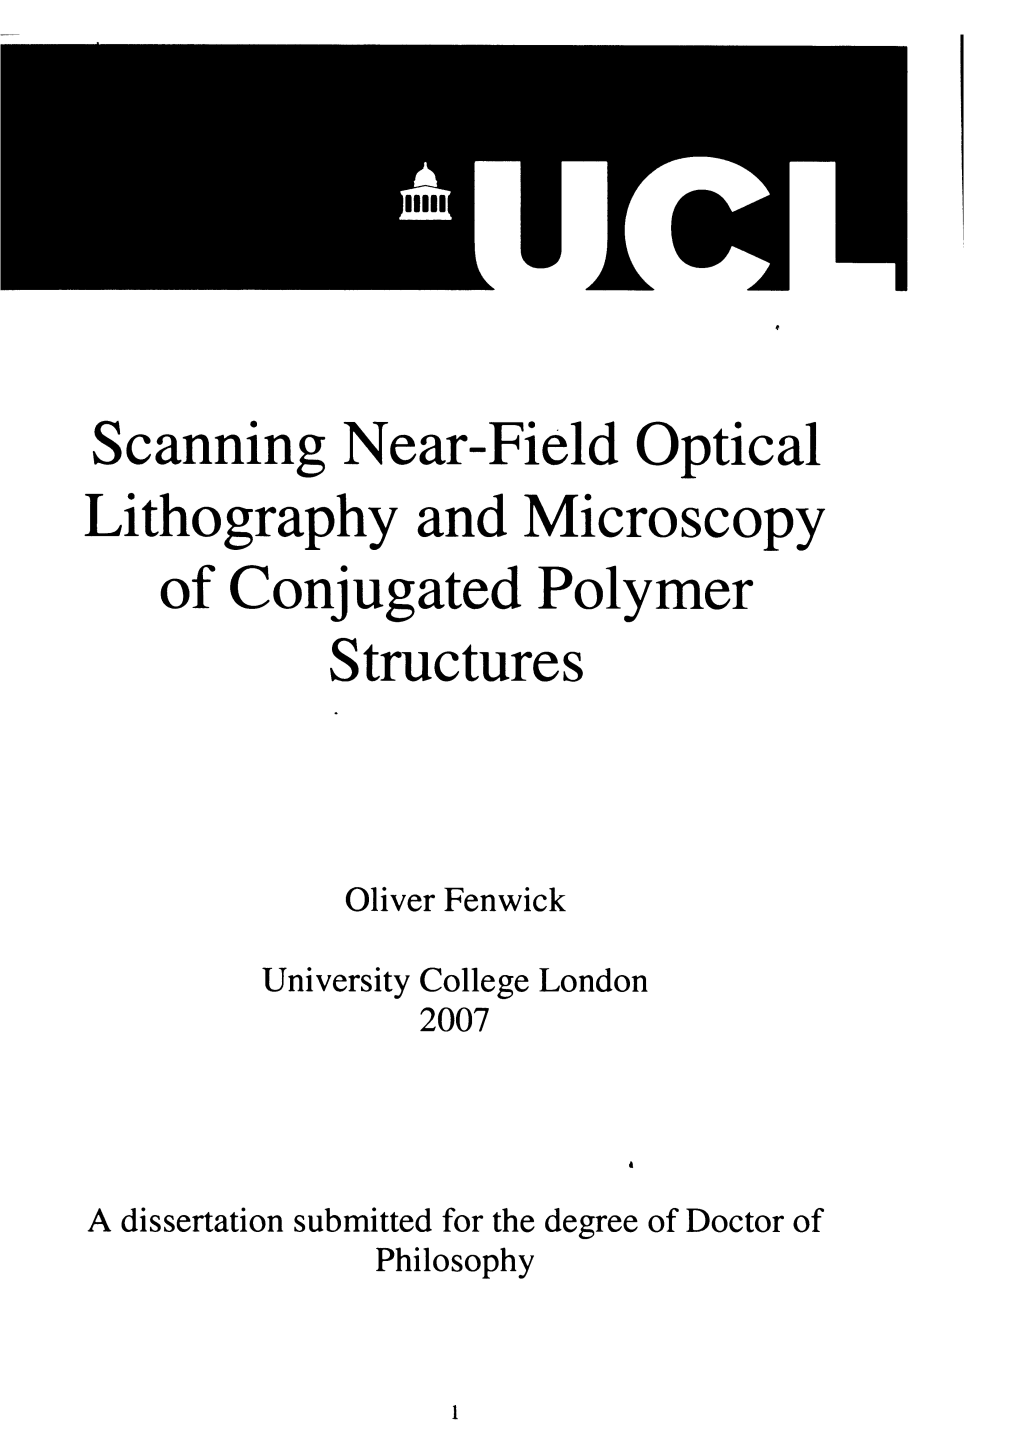 Scanning Near-Field Optical Lithography and Microscopy of Conjugated Polymer Structures